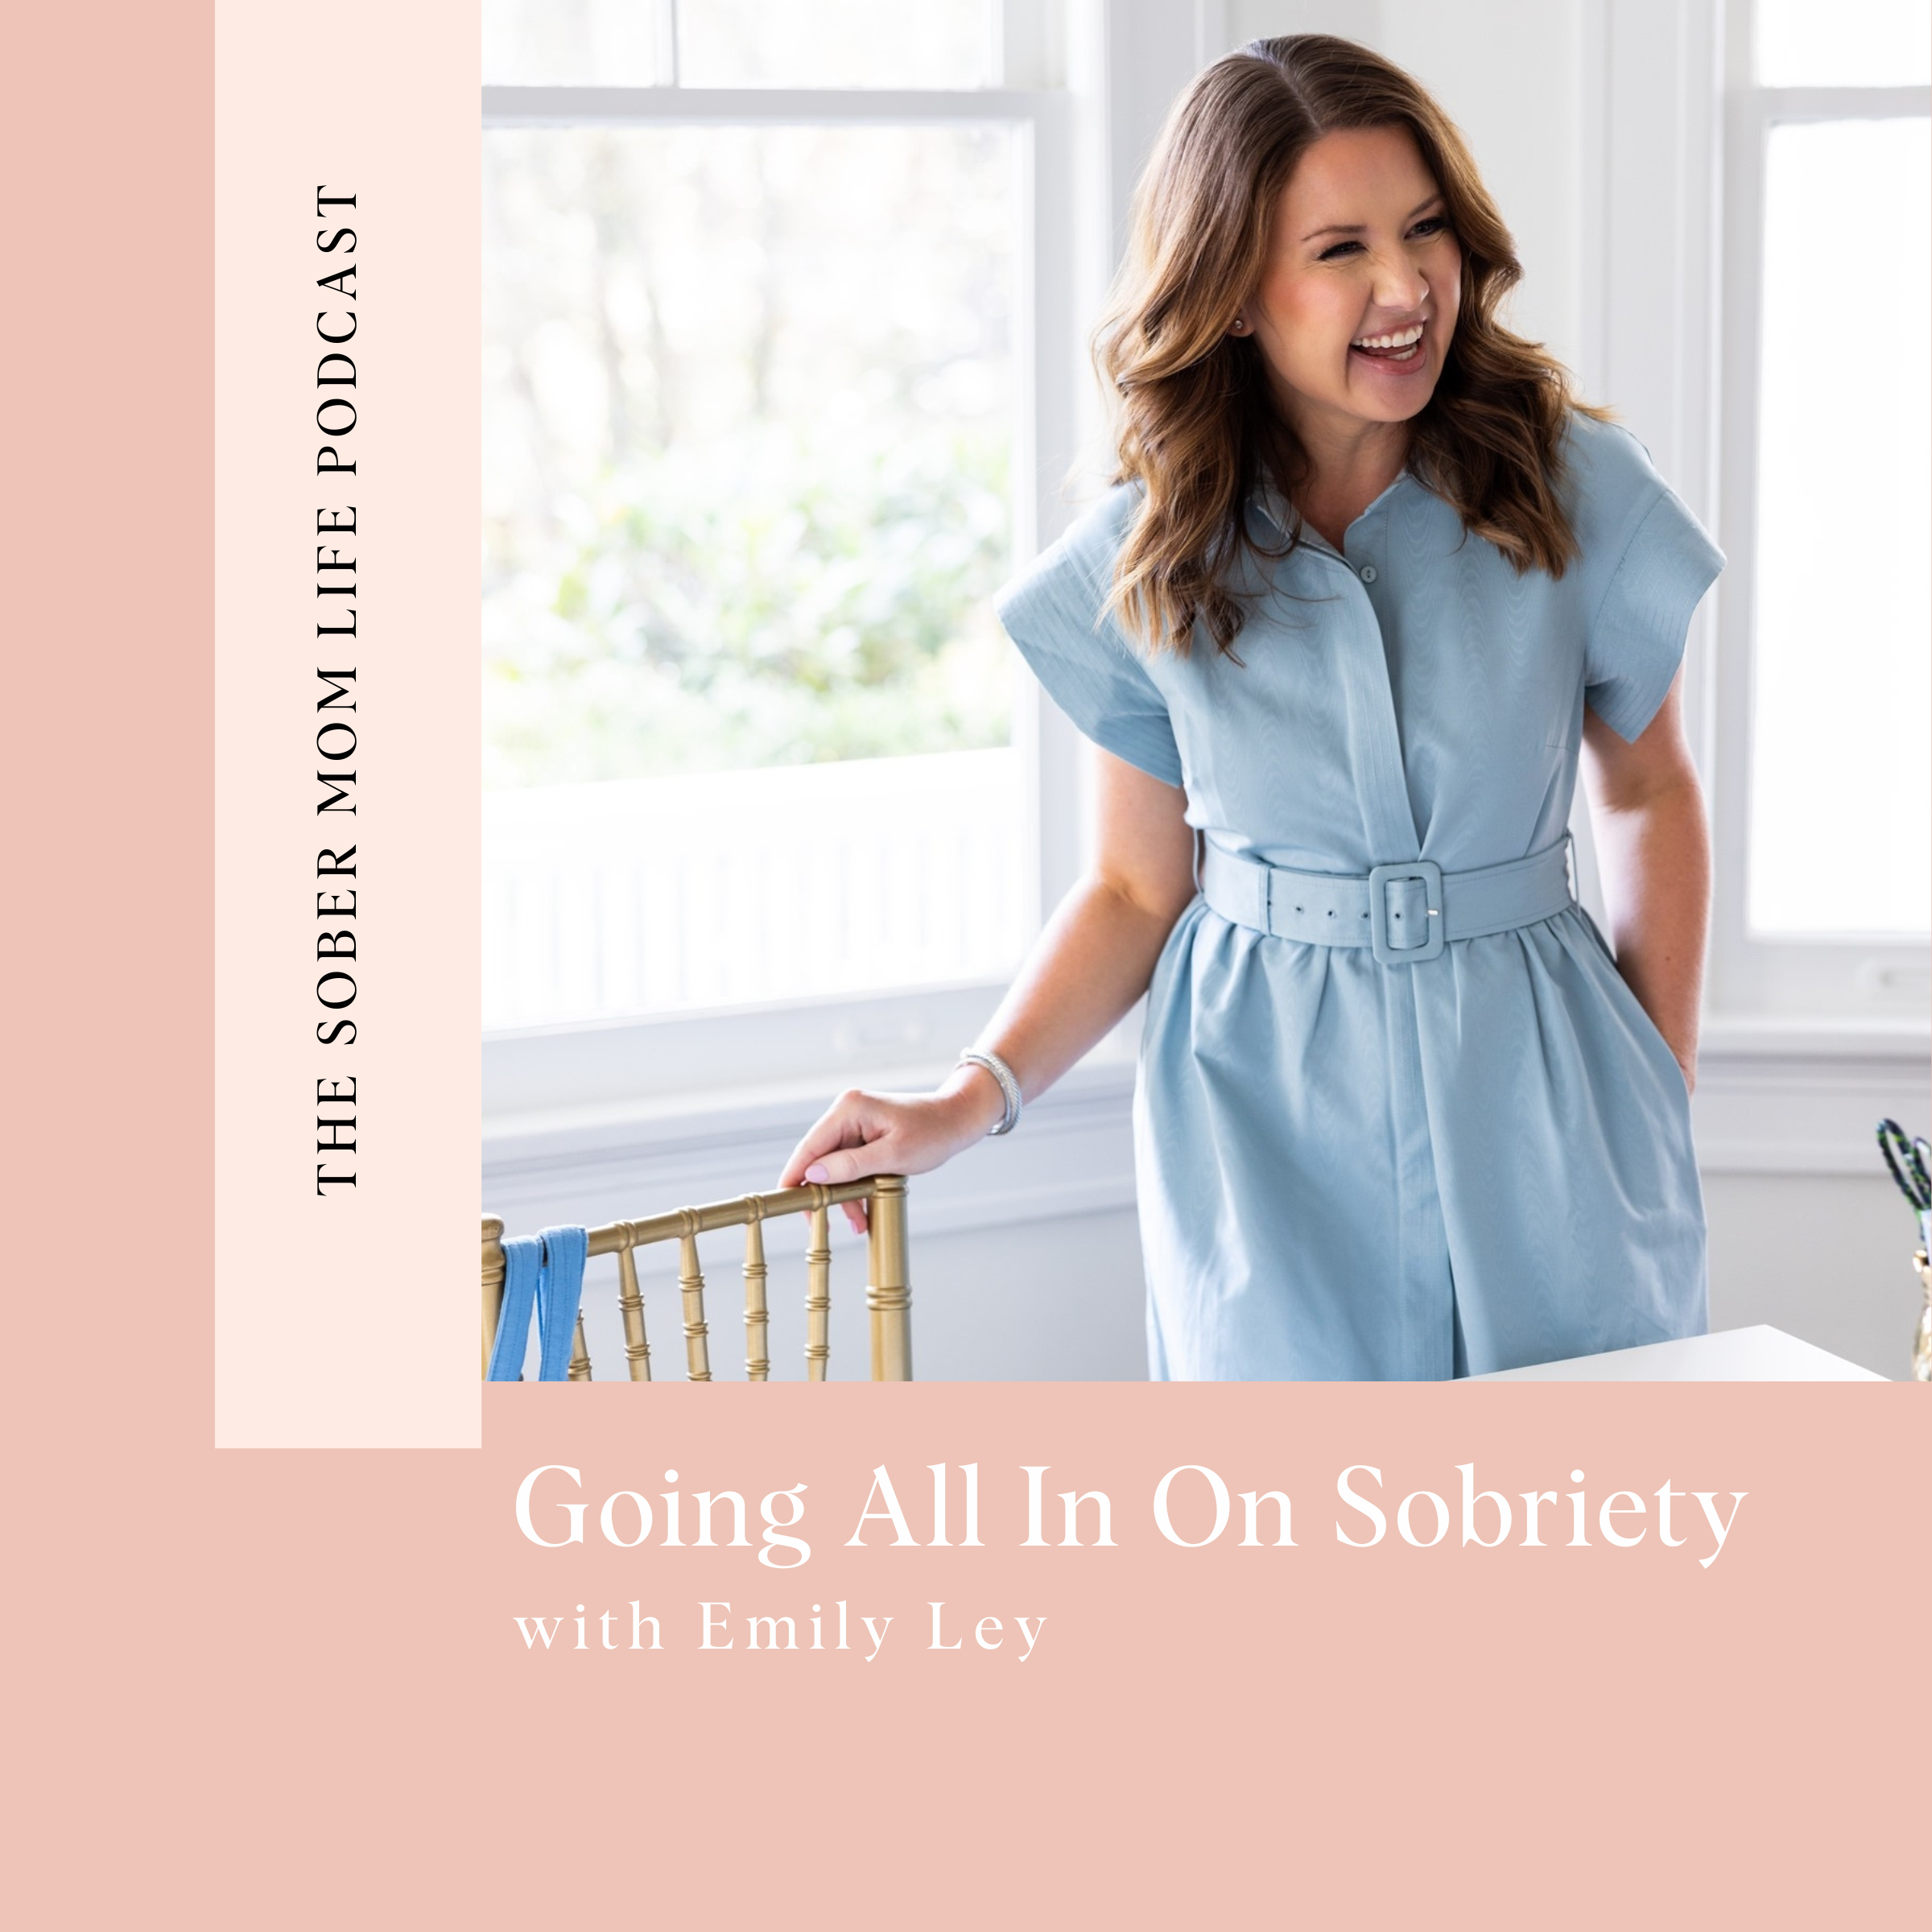 Going All In On Sobriety with Emily Ley